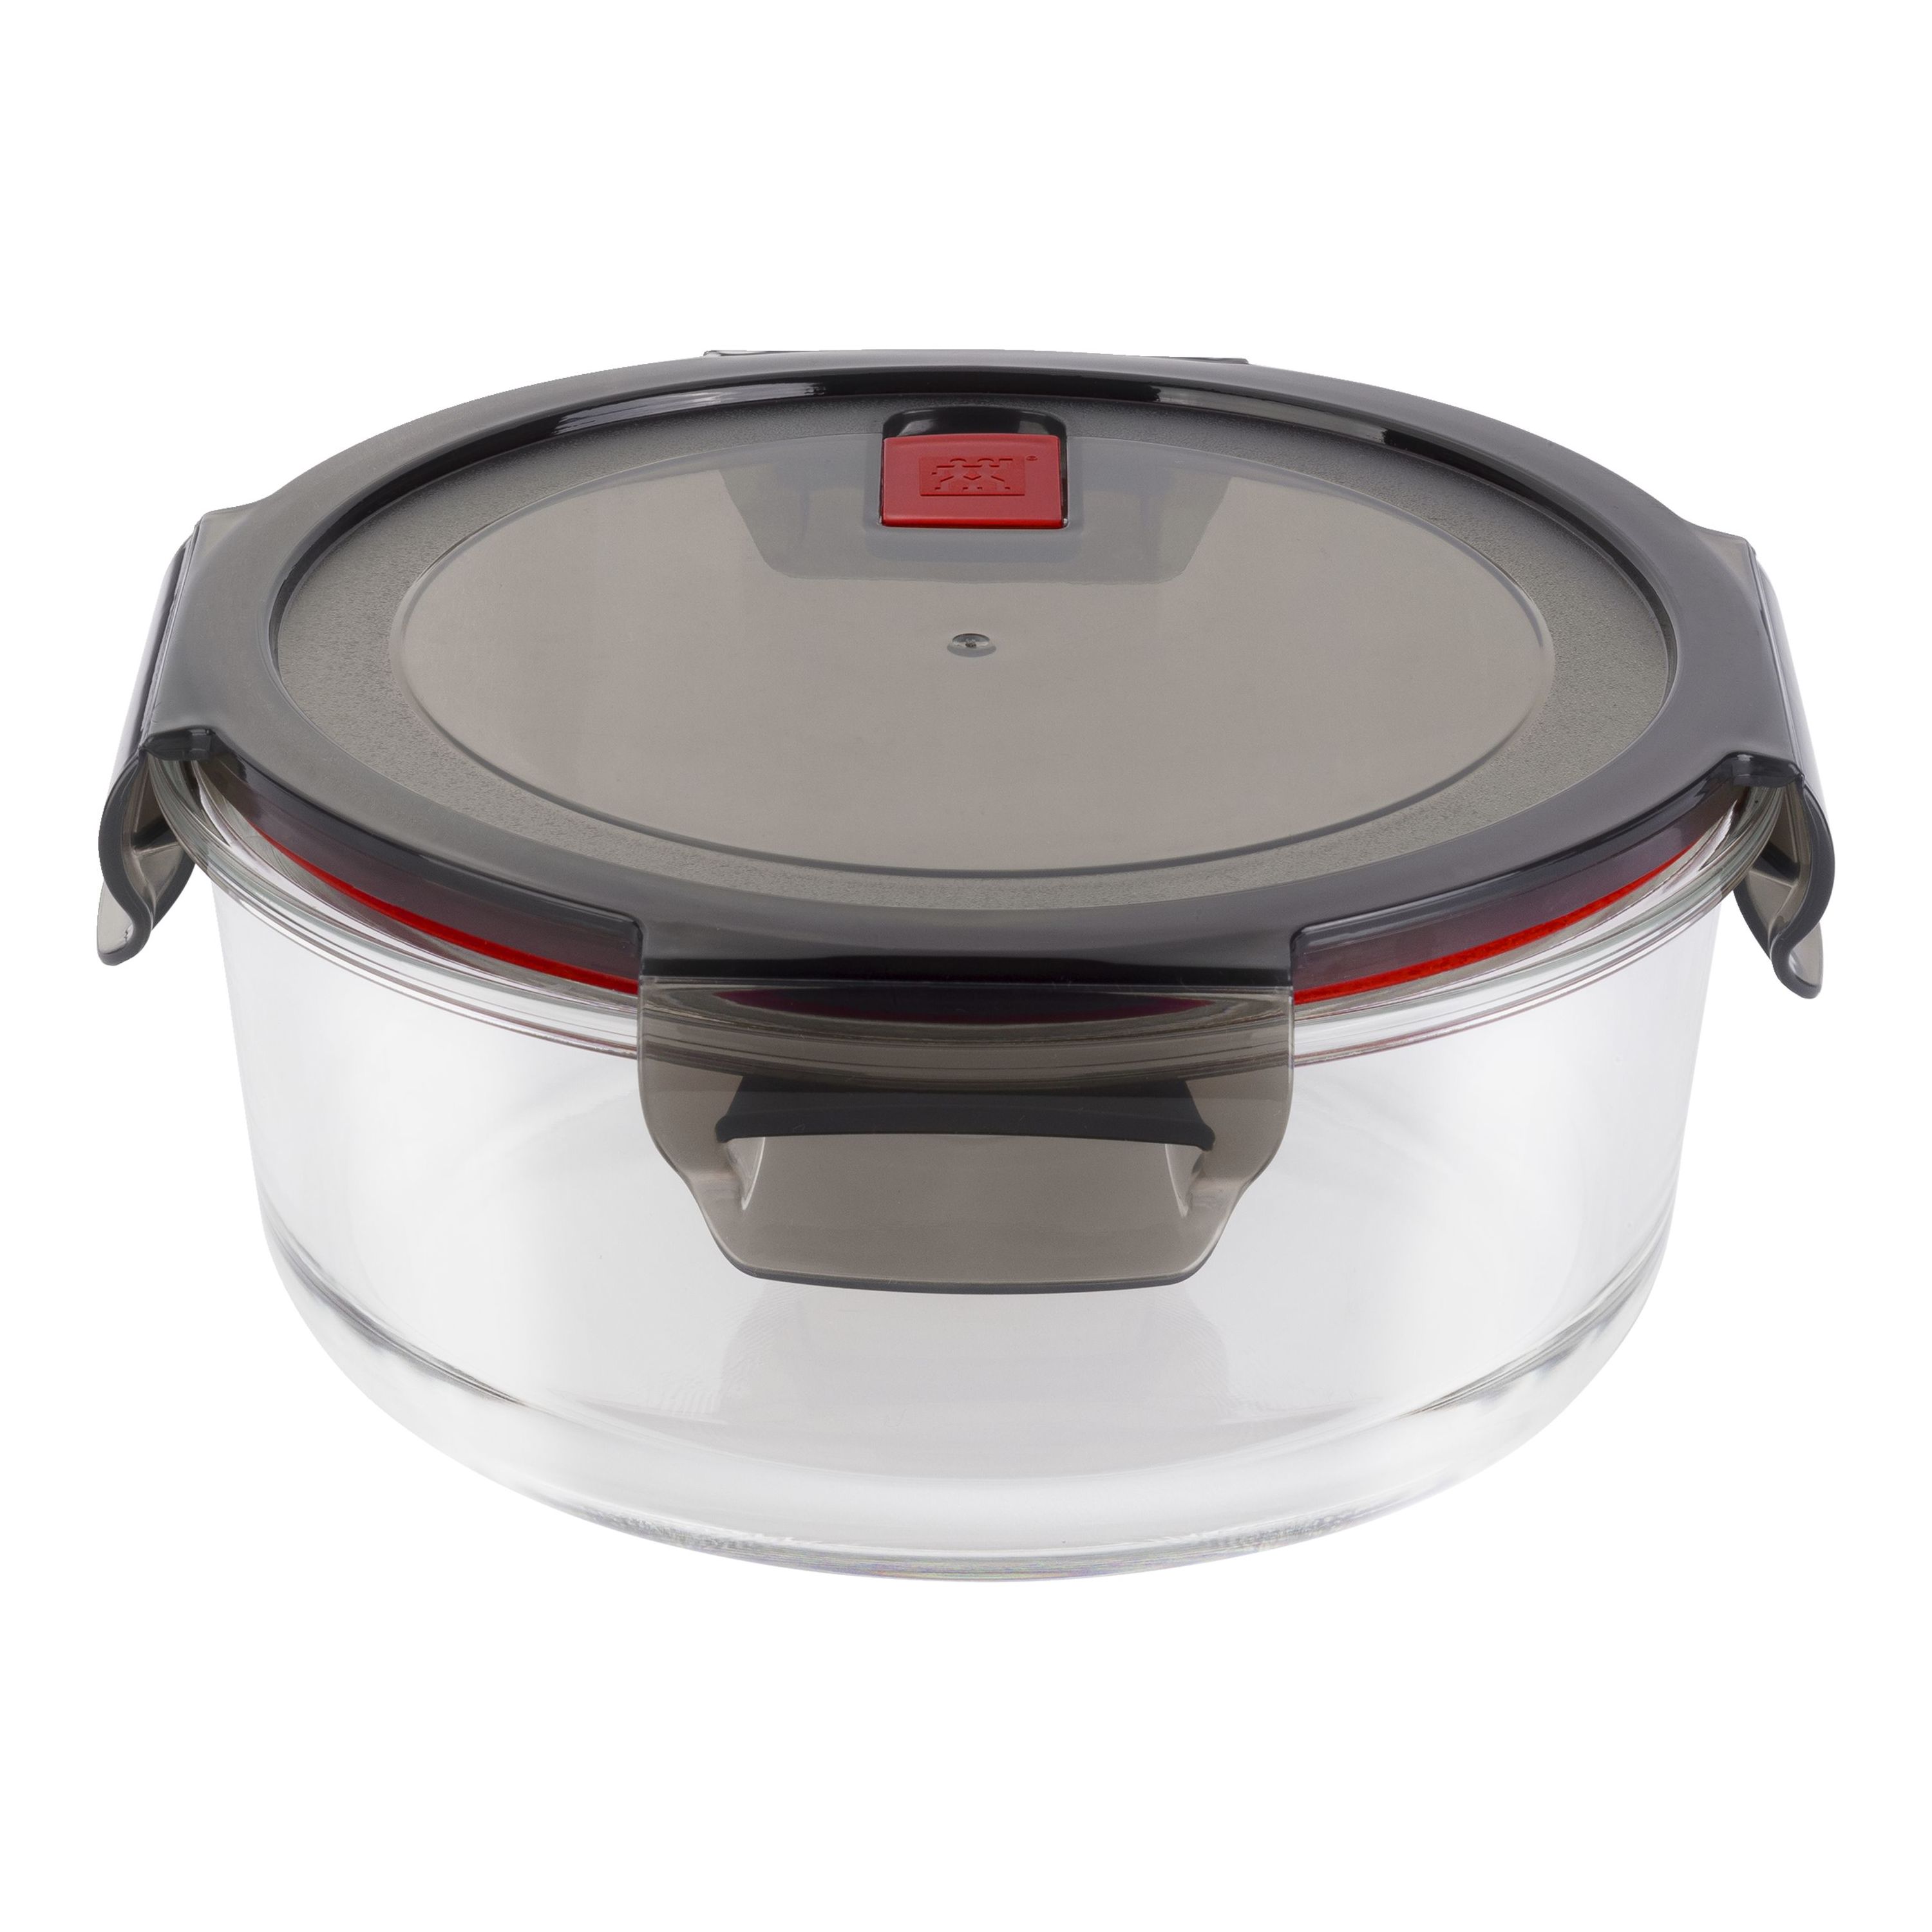 Food storage container GUSTO 1,1 l, Zwilling 